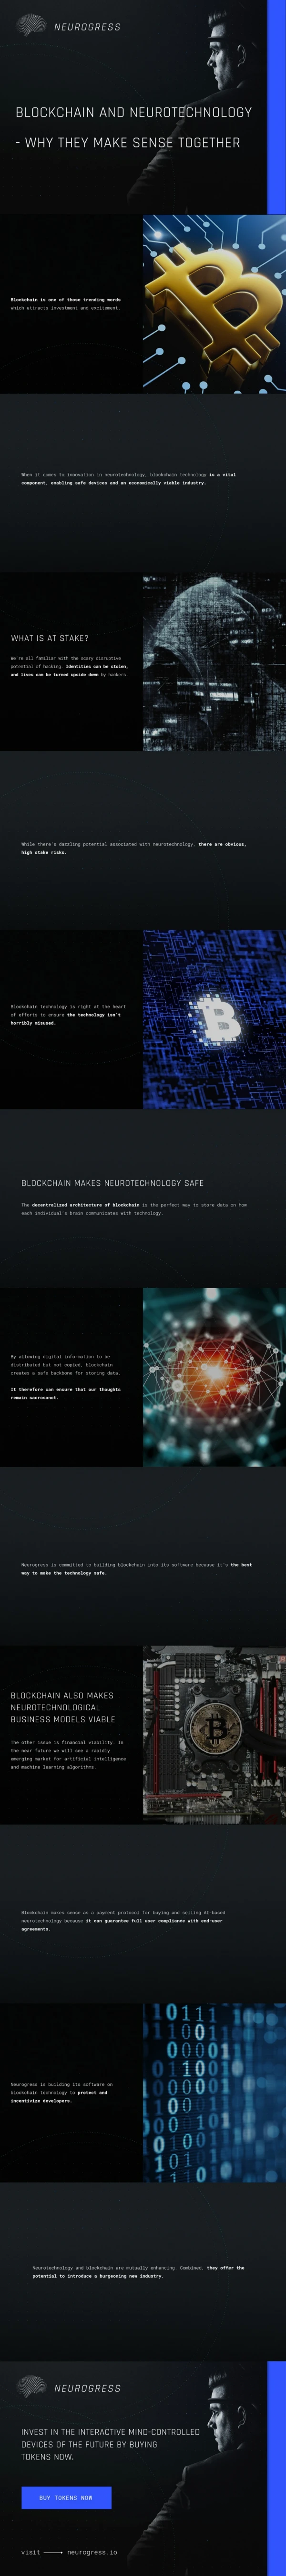 Blockchain and Neurotechnology - Why they make sense together